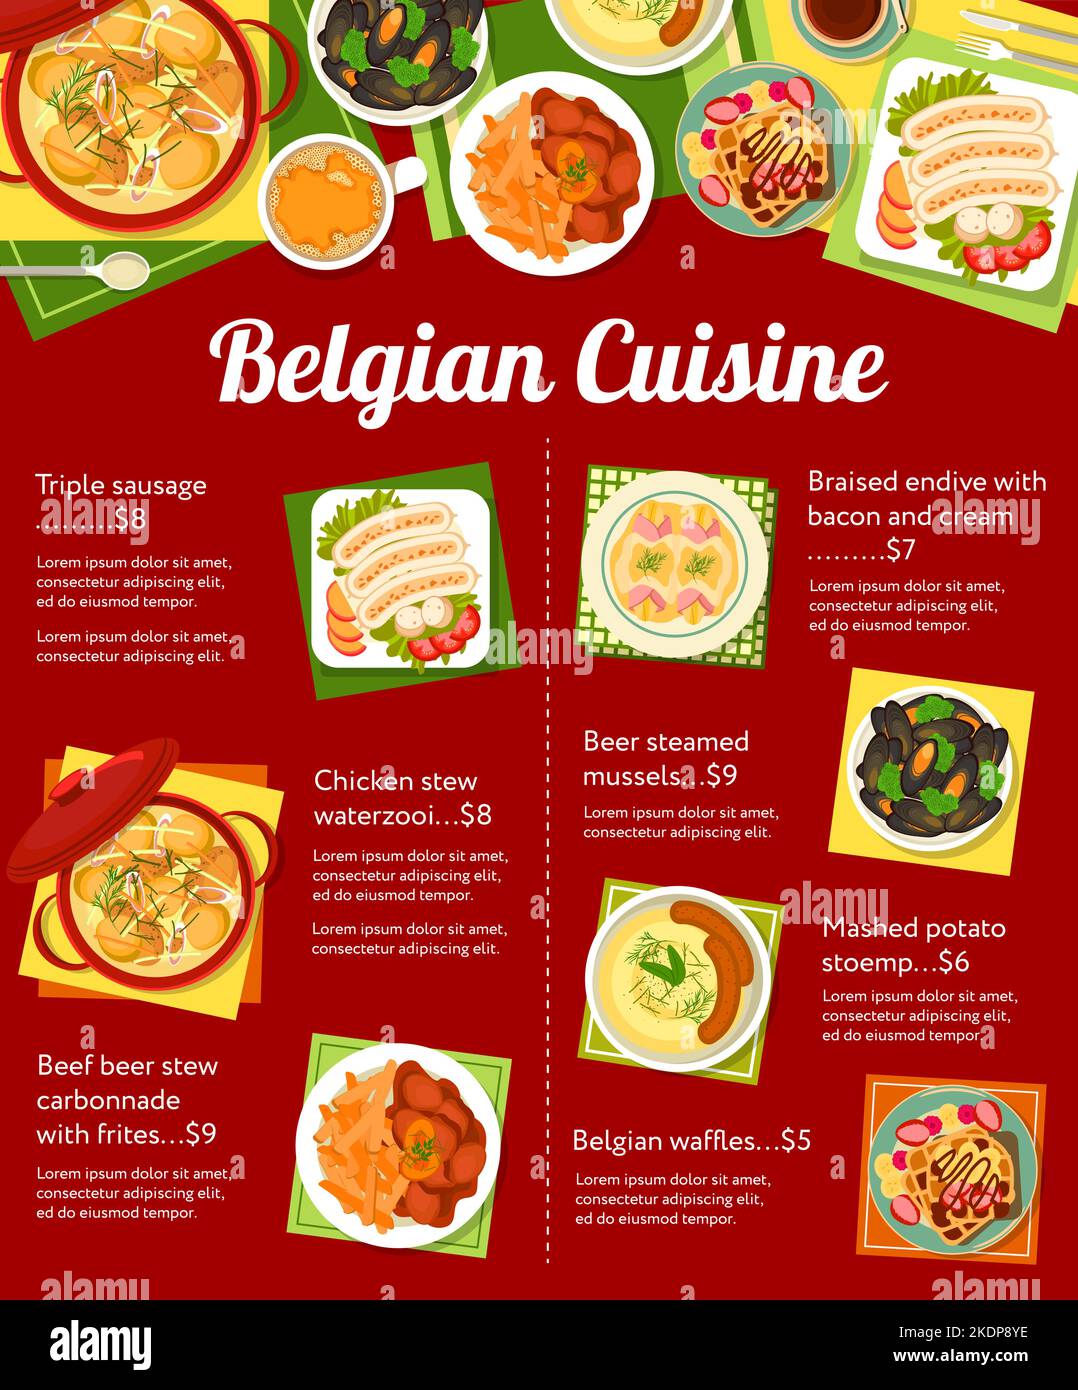 Belgian cuisine menu, food dishes and lunch or dinner meals, vector poster. Belgium cuisine restaurant traditional food triple sausage, Belgian waffles, mashed potato stoemp and chicken stew Stock Vector